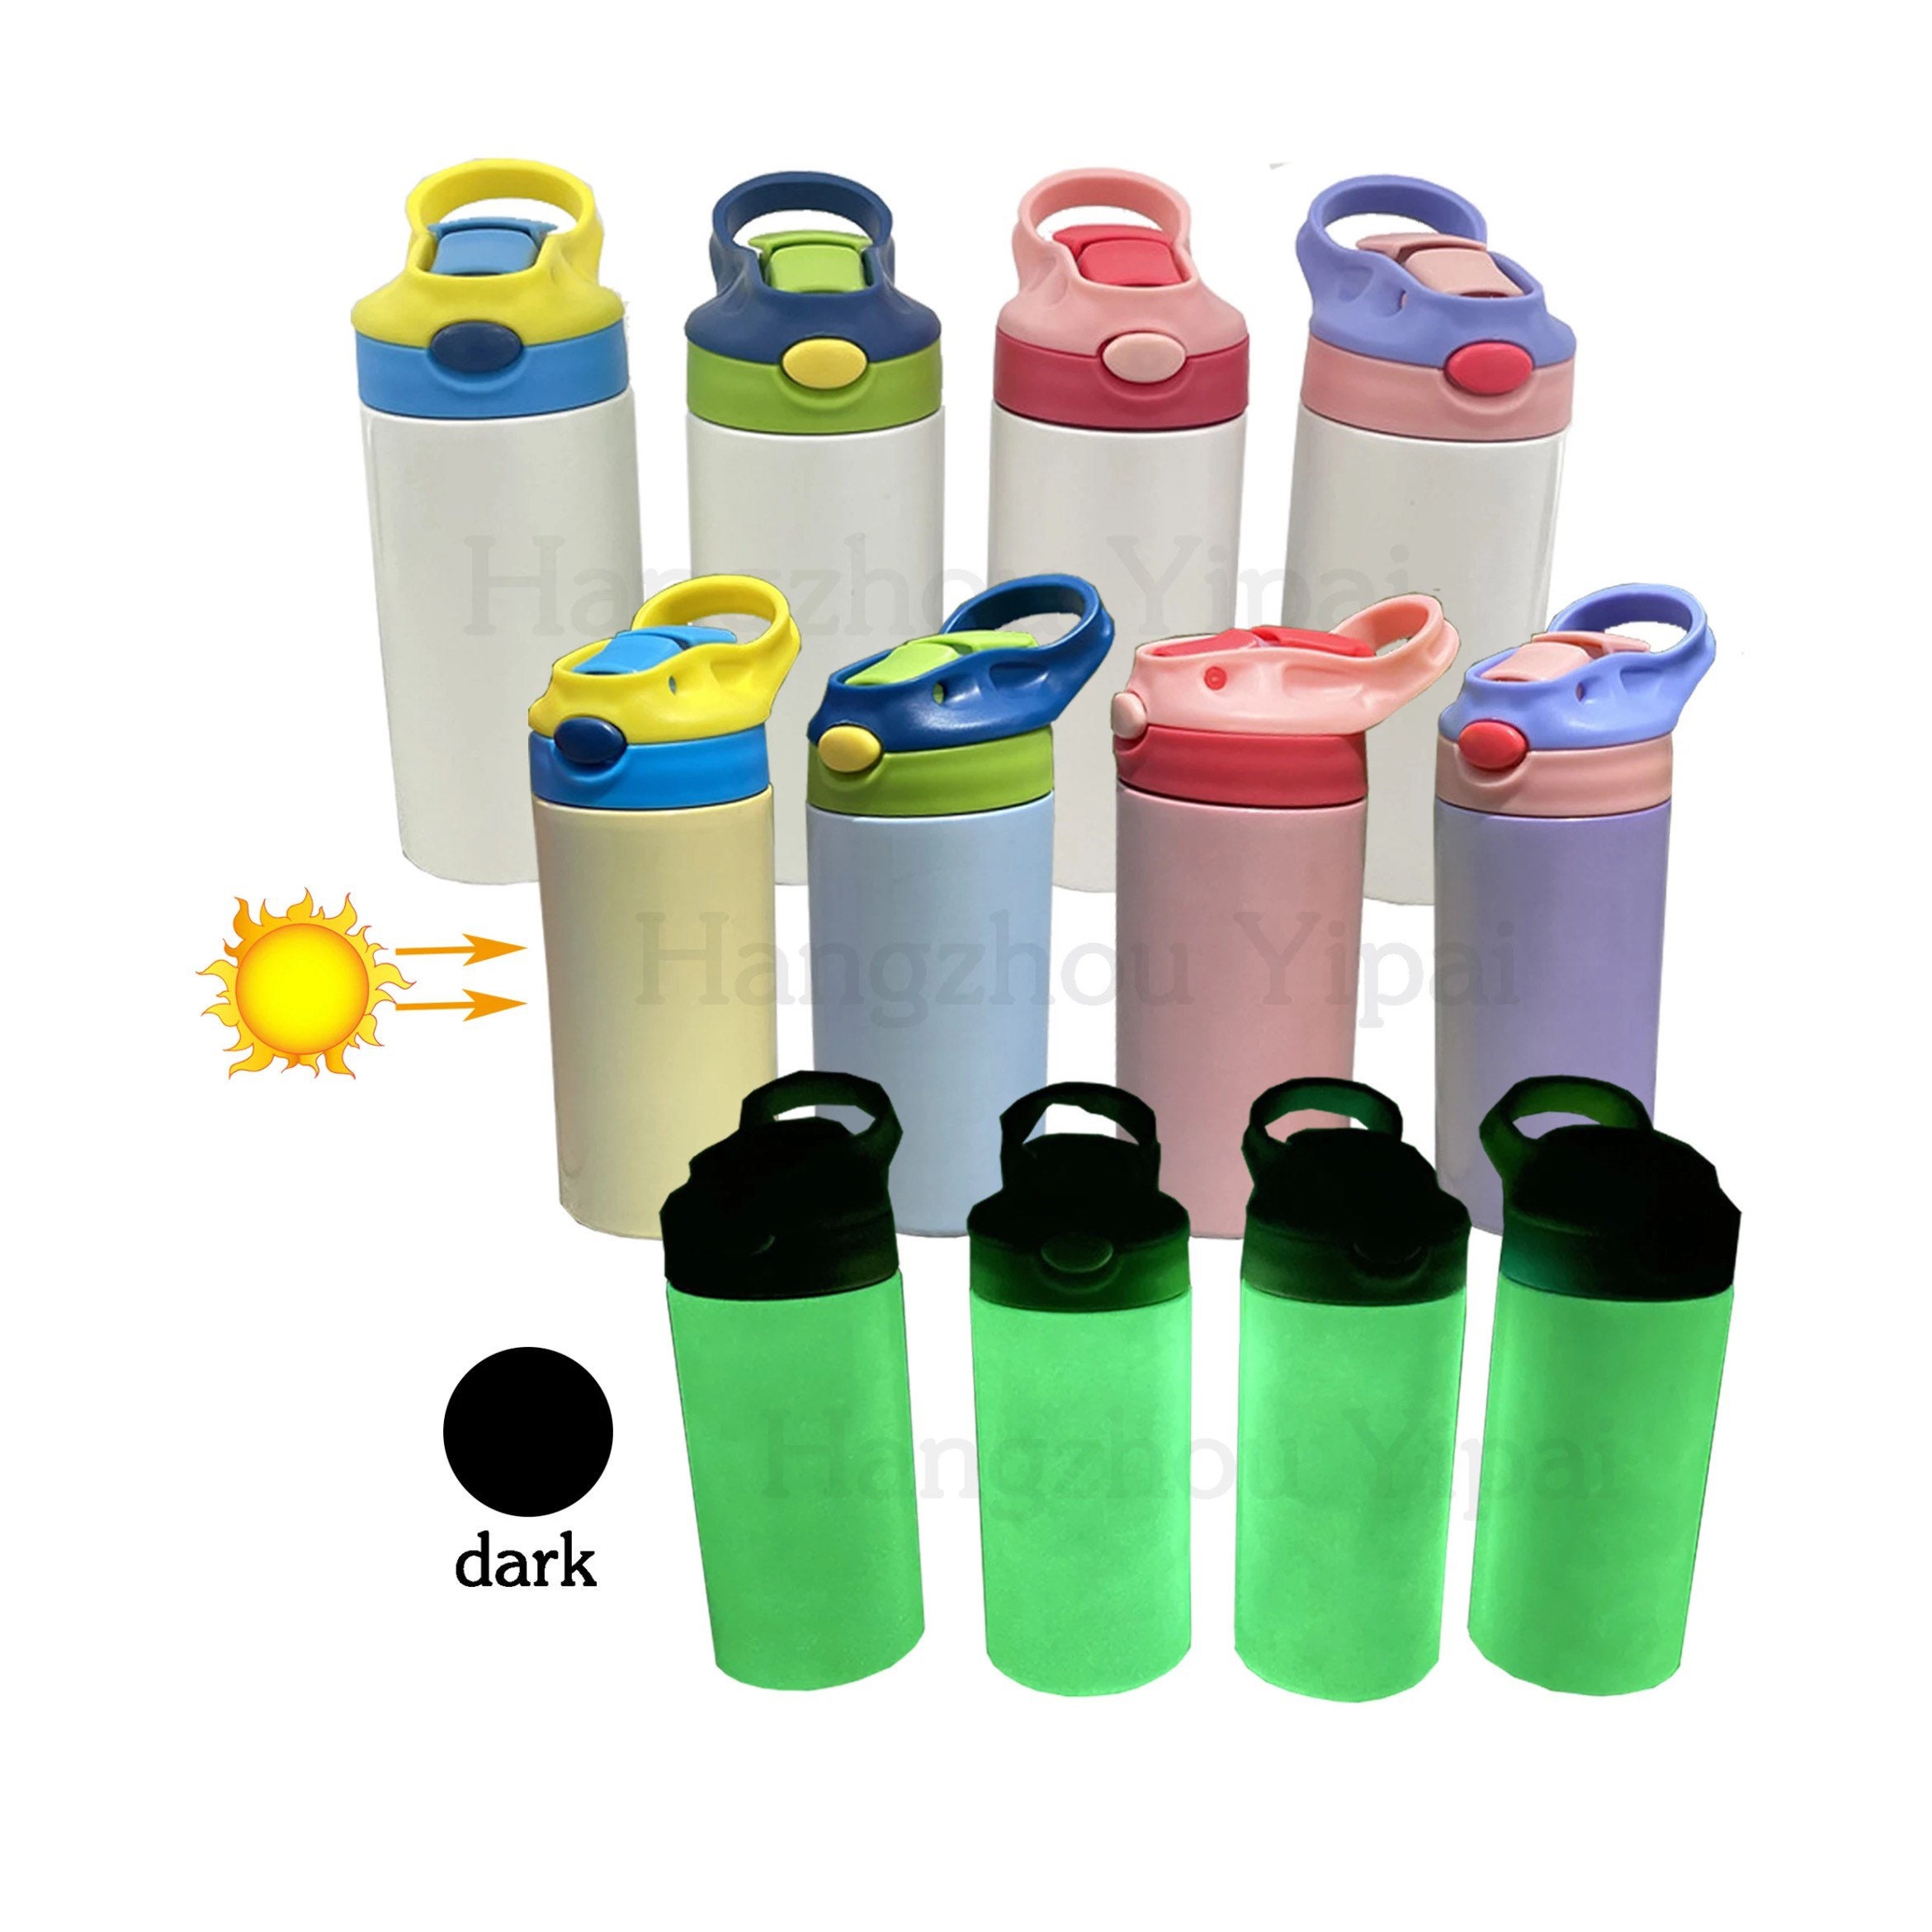 12 Pack STRAIGHT 12oz Sublimation Tumbler Kids Water Bottles With Shrink  Wrap and Rubber Bottoms-choose COLOR 